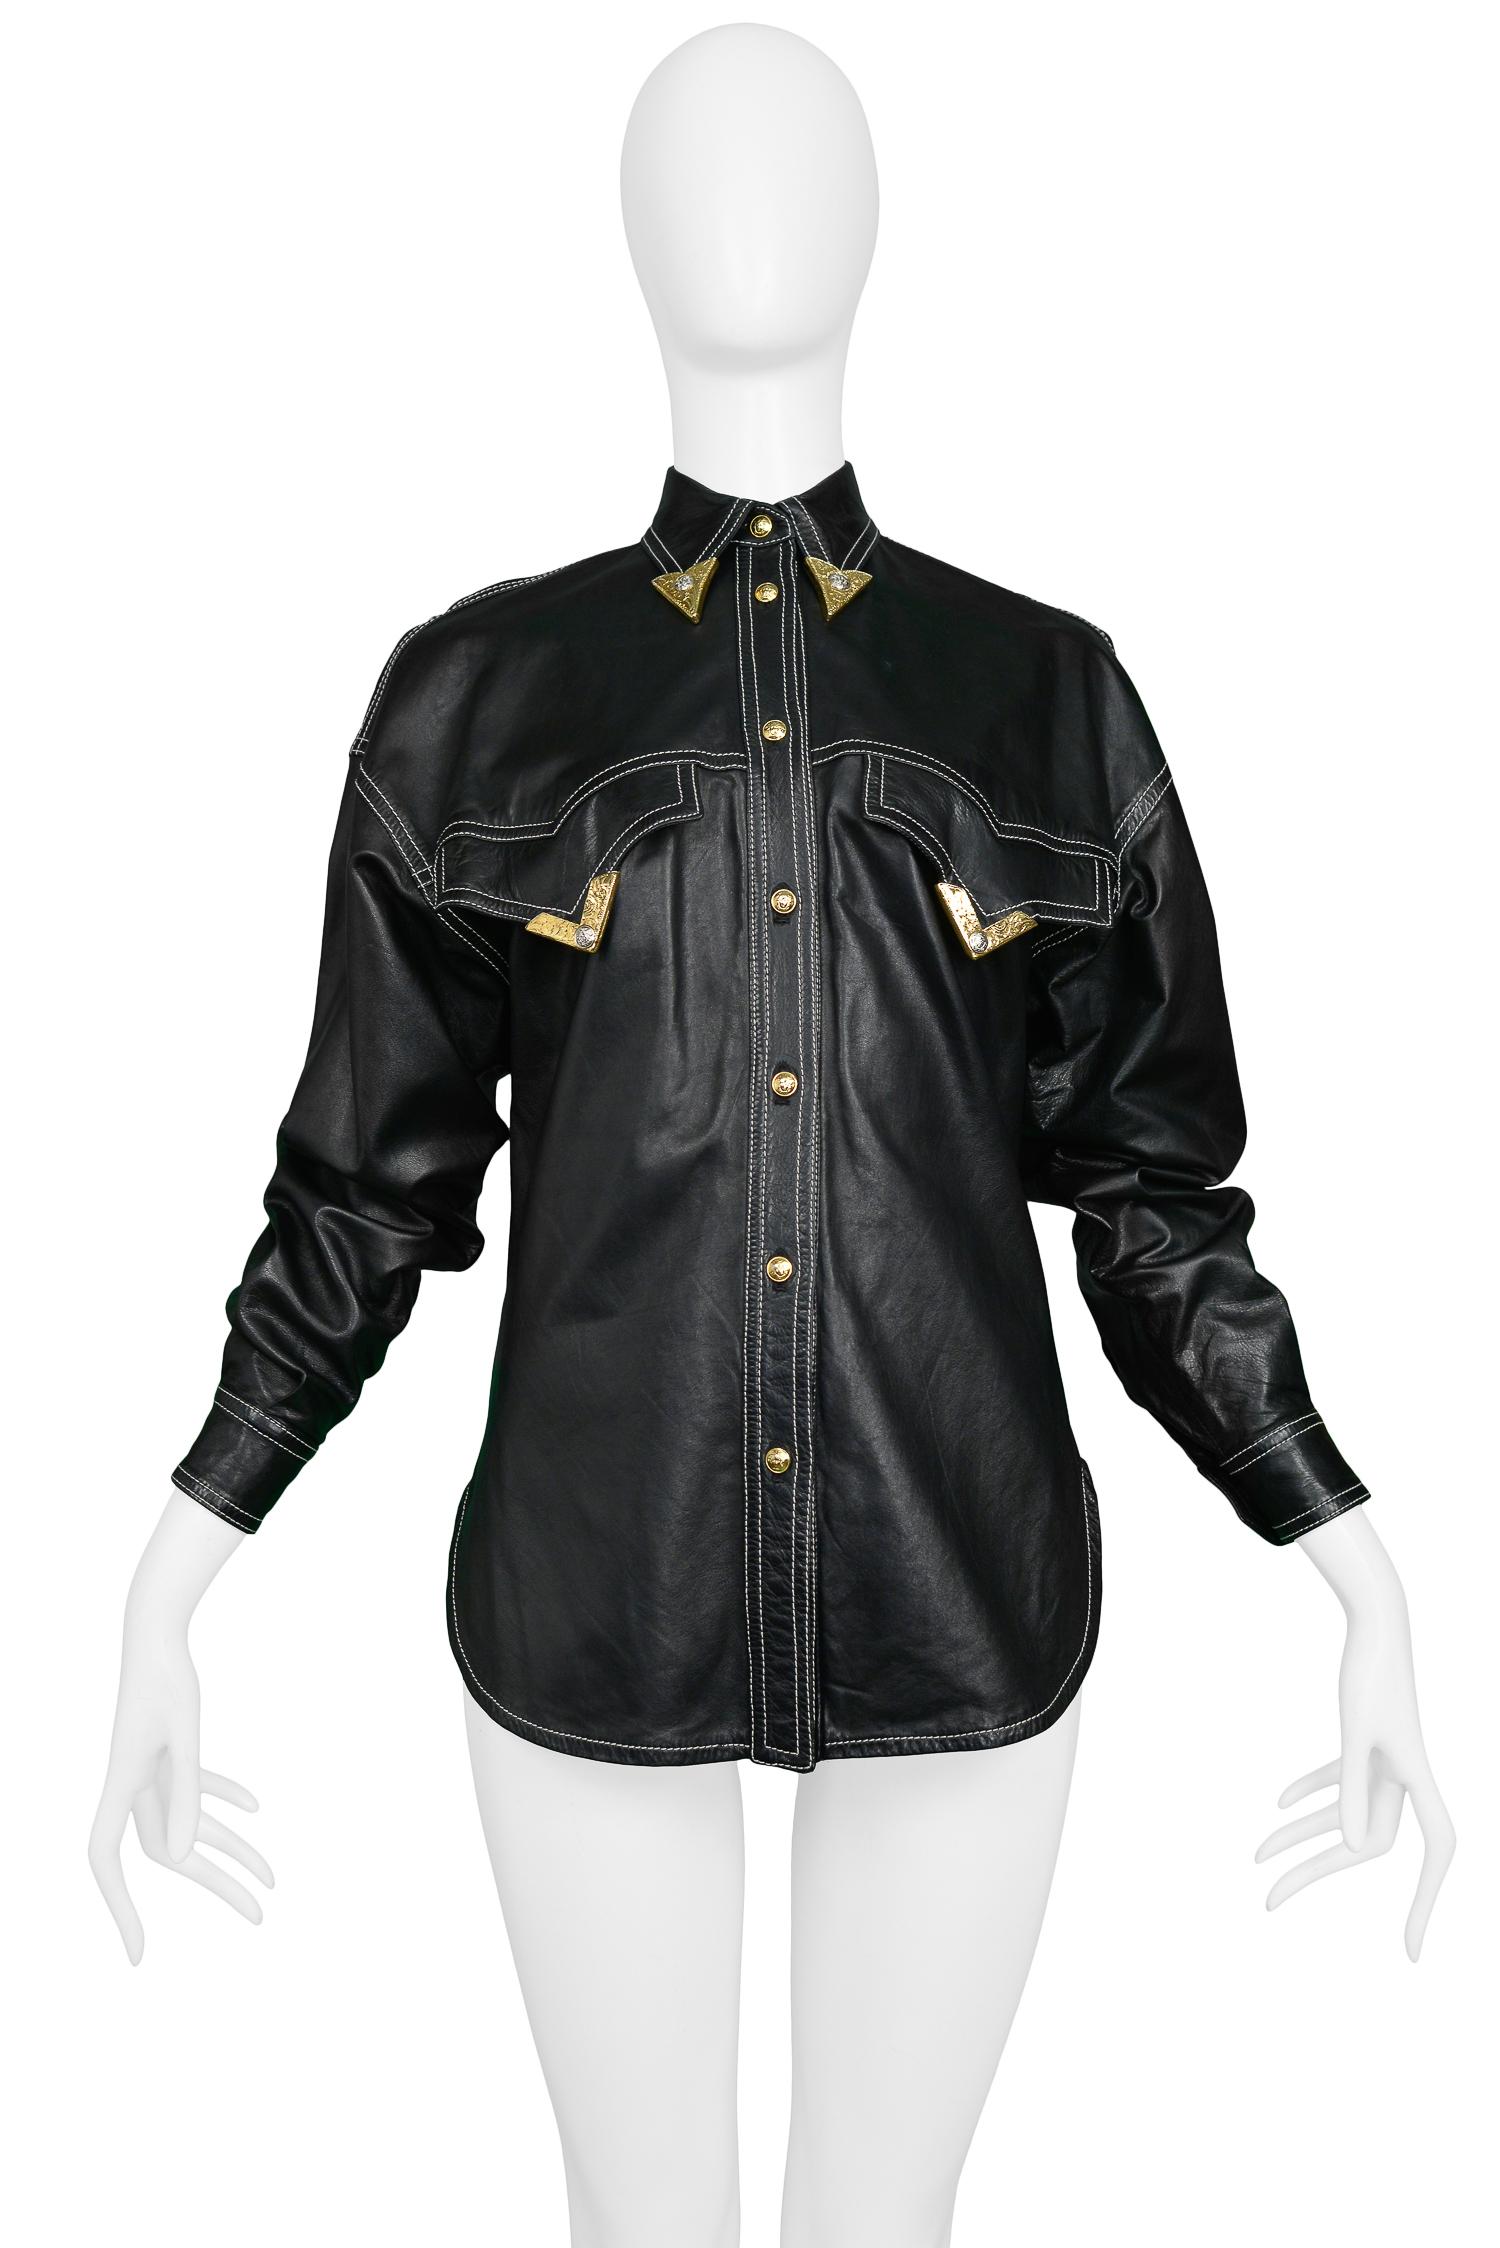 Vintage Gianni Versace black leather western shirt featuring a gold tipped collar and chest pockets, exposed white stitching and Medusa snap buttons at front closure. 

Excellent Condition.

Size: 40